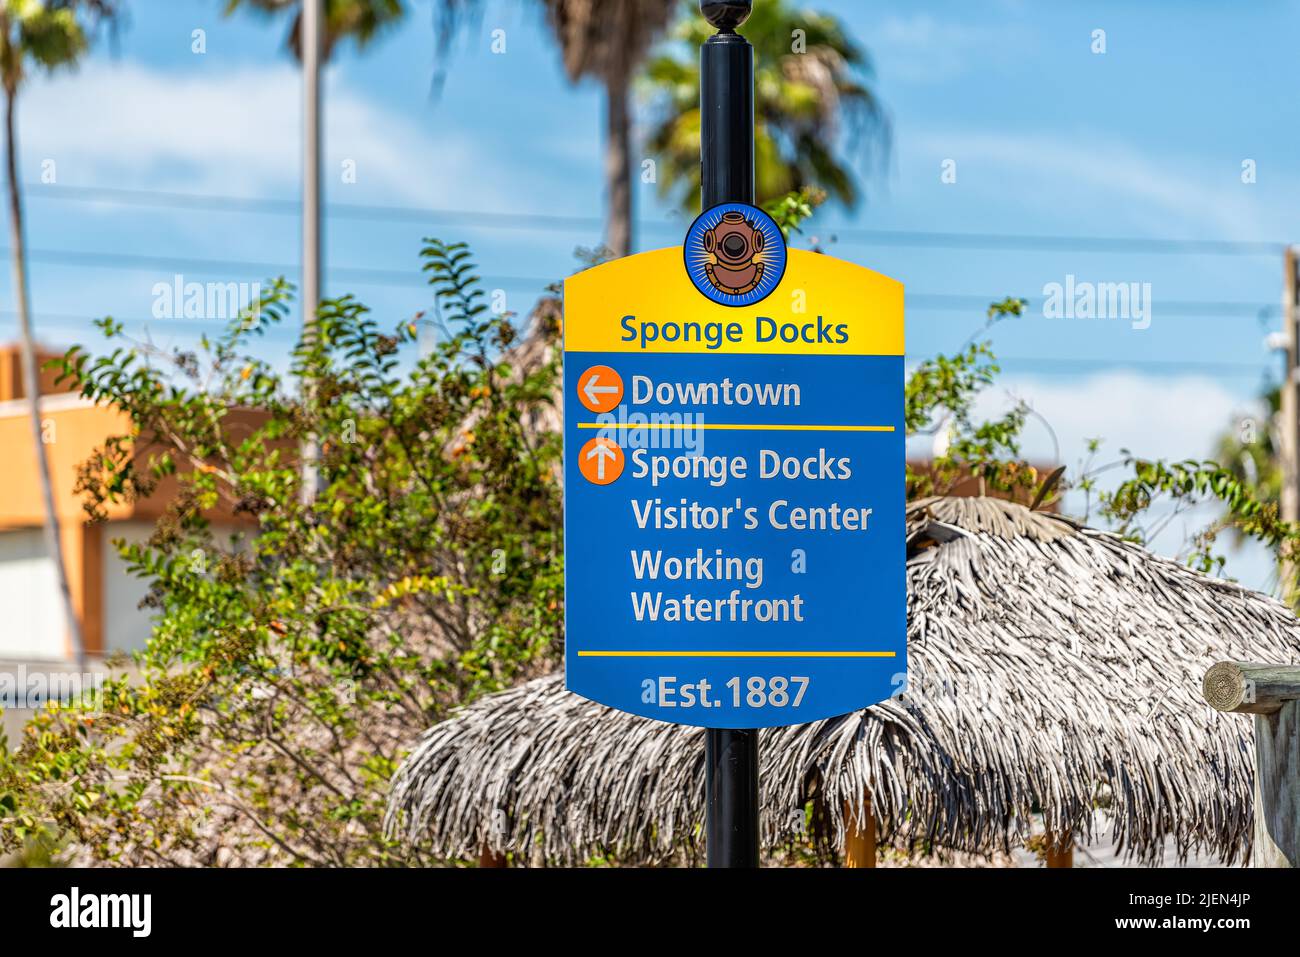 Tarpon Springs, USA - October 4, 2021: Greek town of Tarpon Springs, Florida with sign on road street for sponge docks, downtown, visitor's center, an Stock Photo